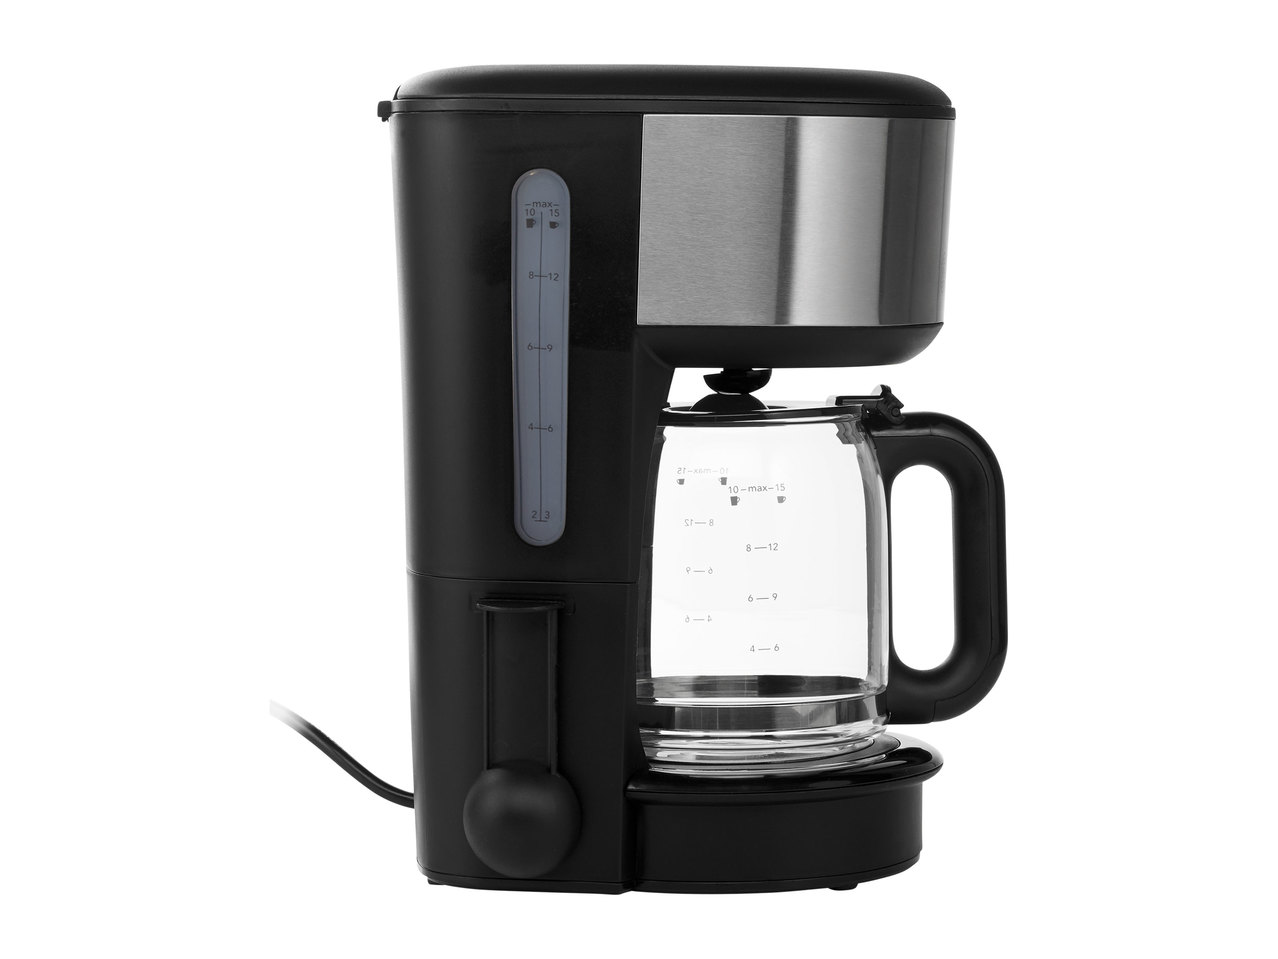 Russell Hobbs Oxford Coffee Maker1